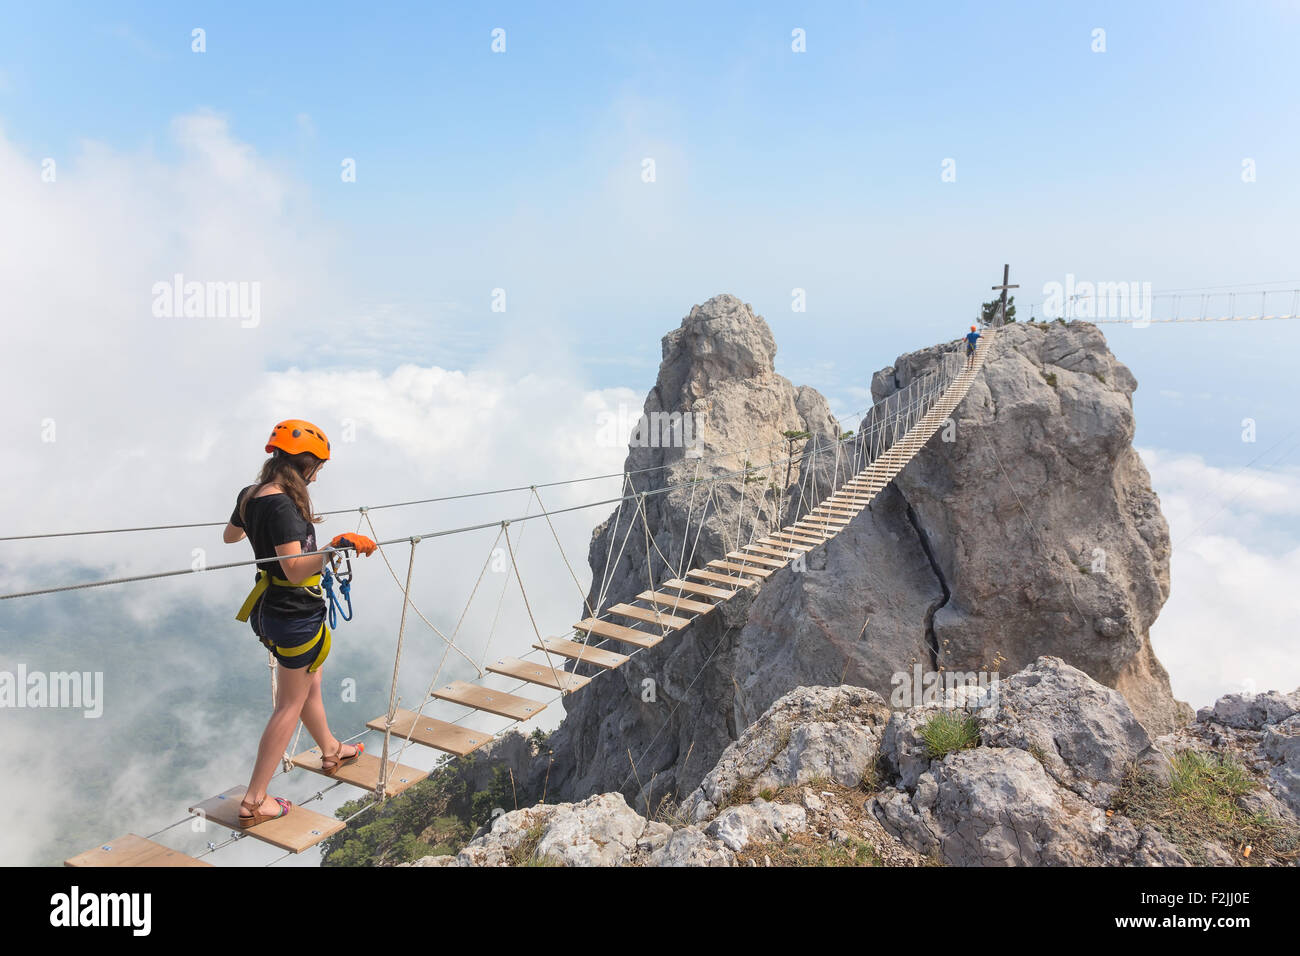 Young woman crossing the chasm on the rope bridge Stock Photo